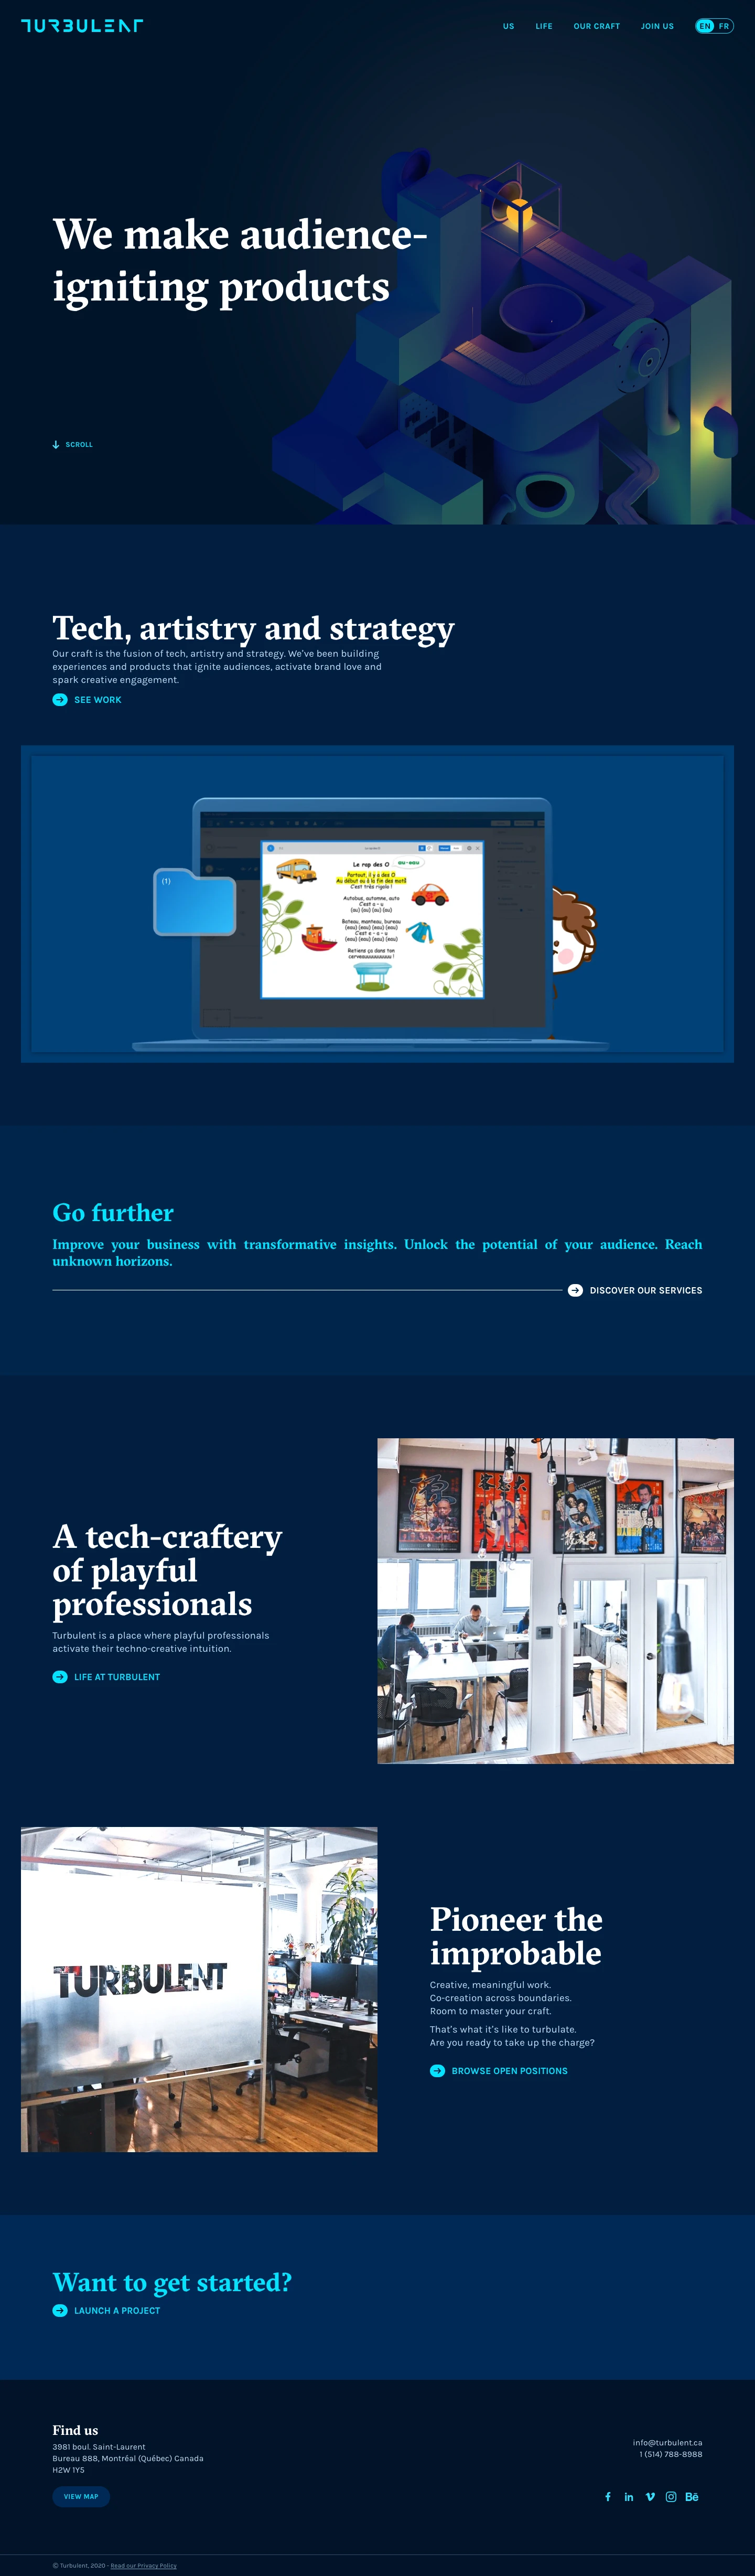 Turbulent Landing Page Example: We make audience-igniting products. Our craft is the fusion of tech, artistry and strategy. We’ve been buildingexperiences and products that ignite audiences, activate brand love and spark creative engagement.